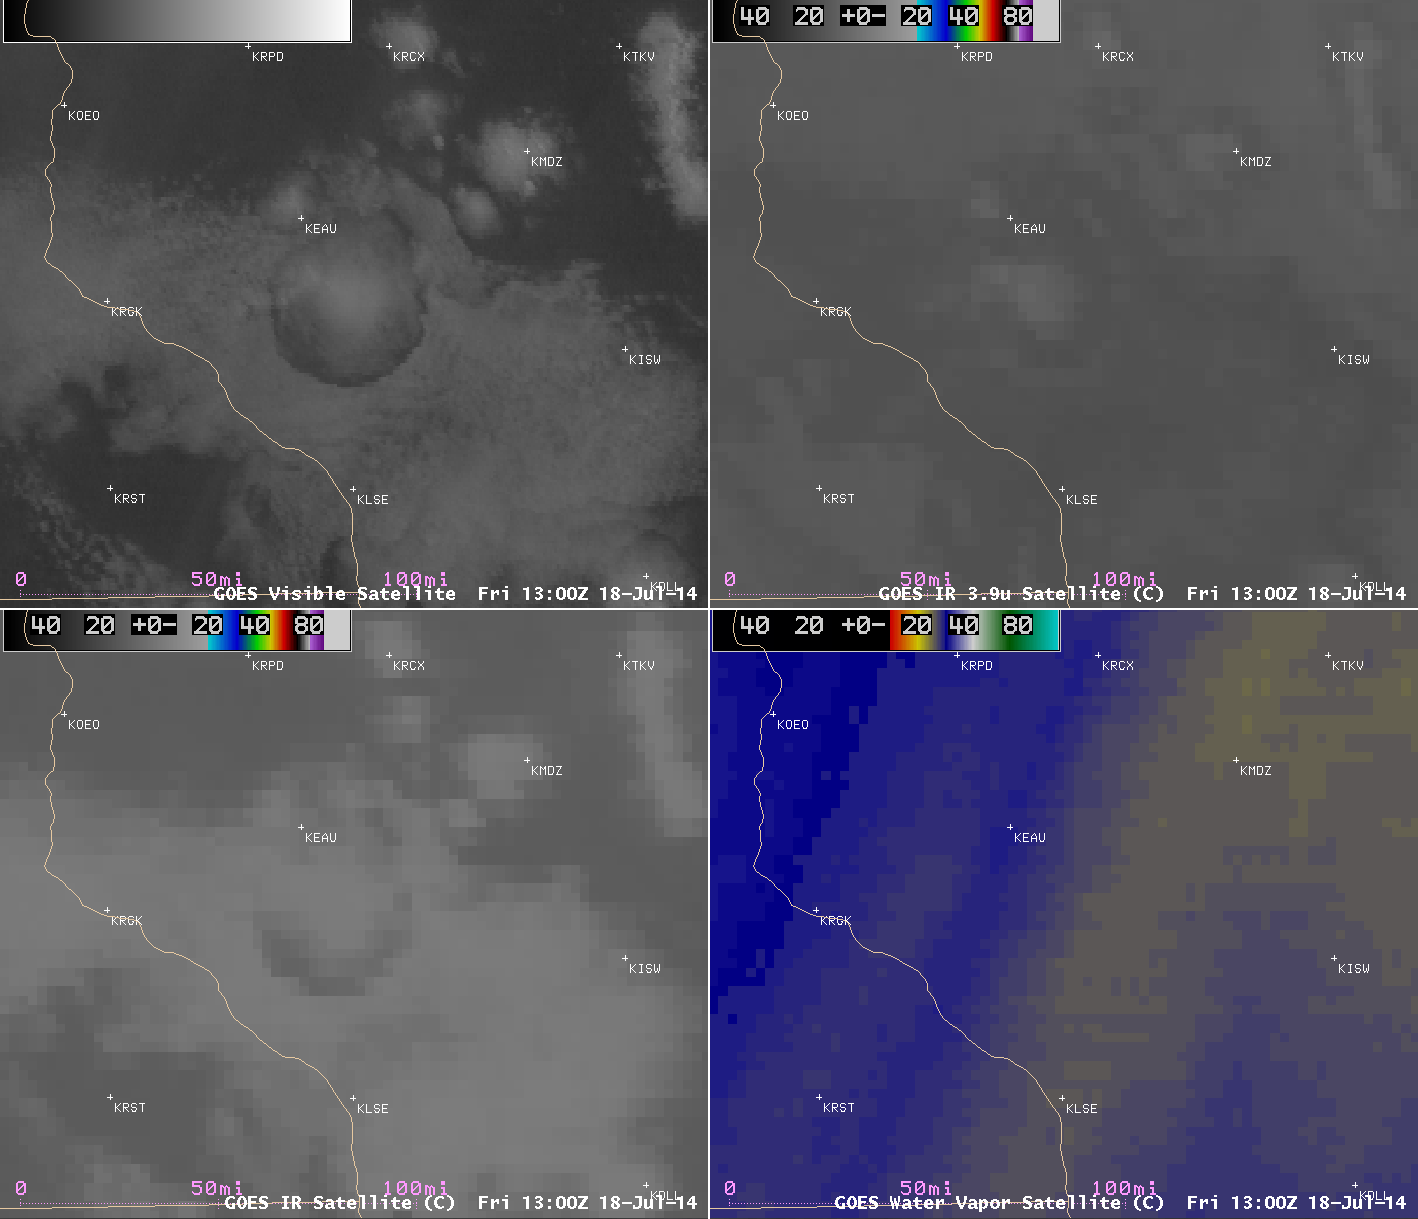 GOES-13 0.63 µm visible (upper left), 3.9 µm shortwave IR (upper right), 10.7 µm IR (lower left), and 6.5 µm water vapor (lower right) images [click to play animation]